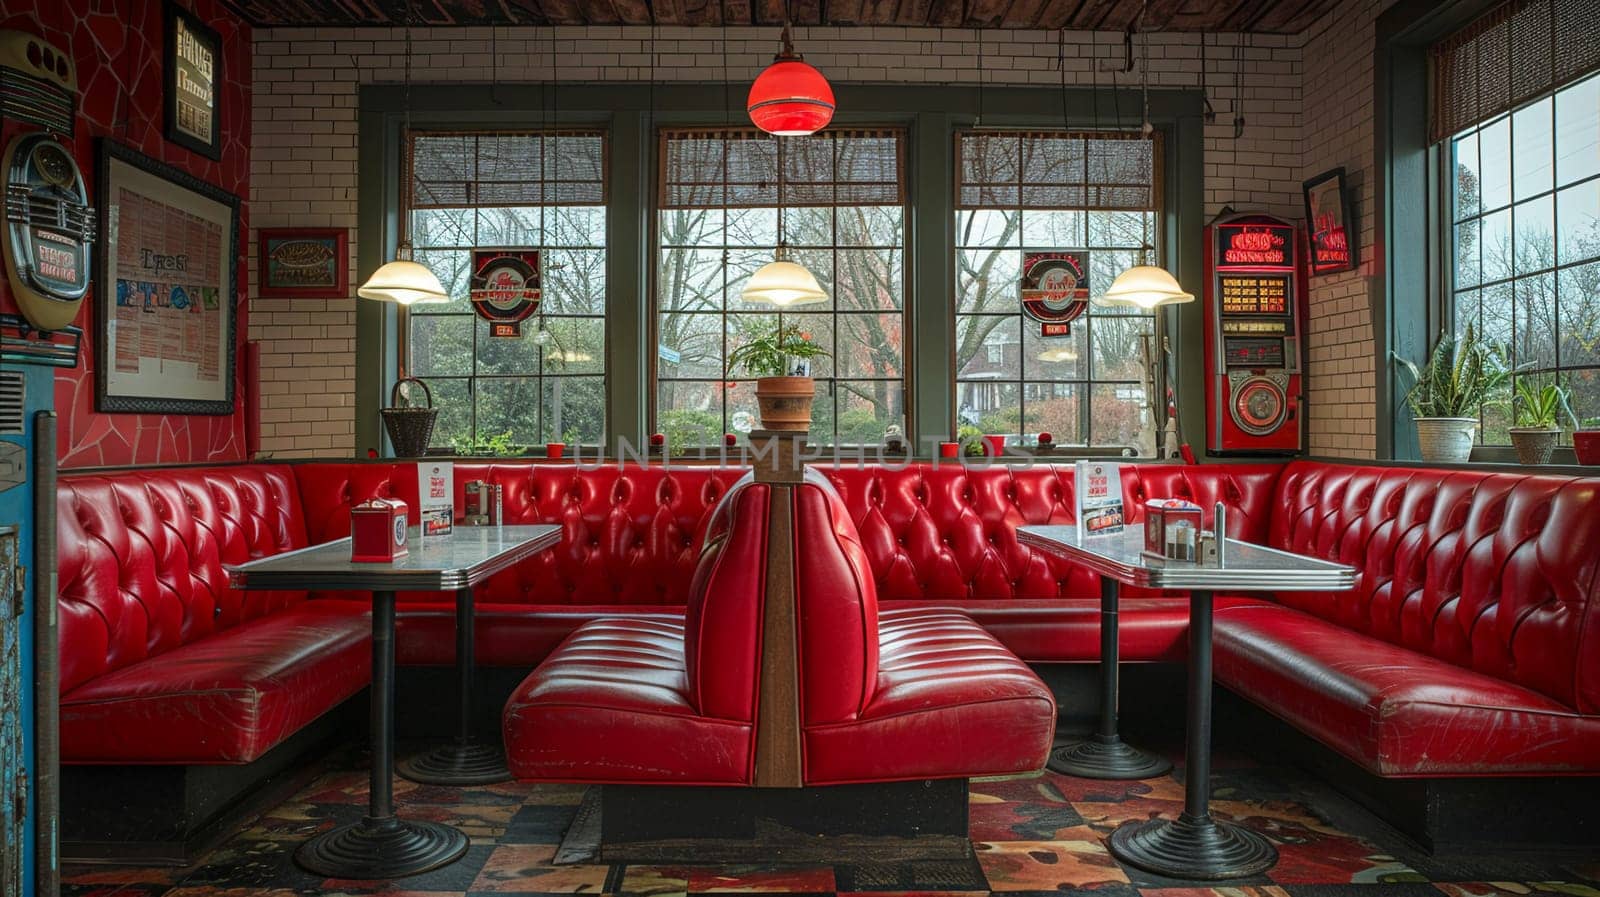 Classic American diner with red leather booths and a jukebox